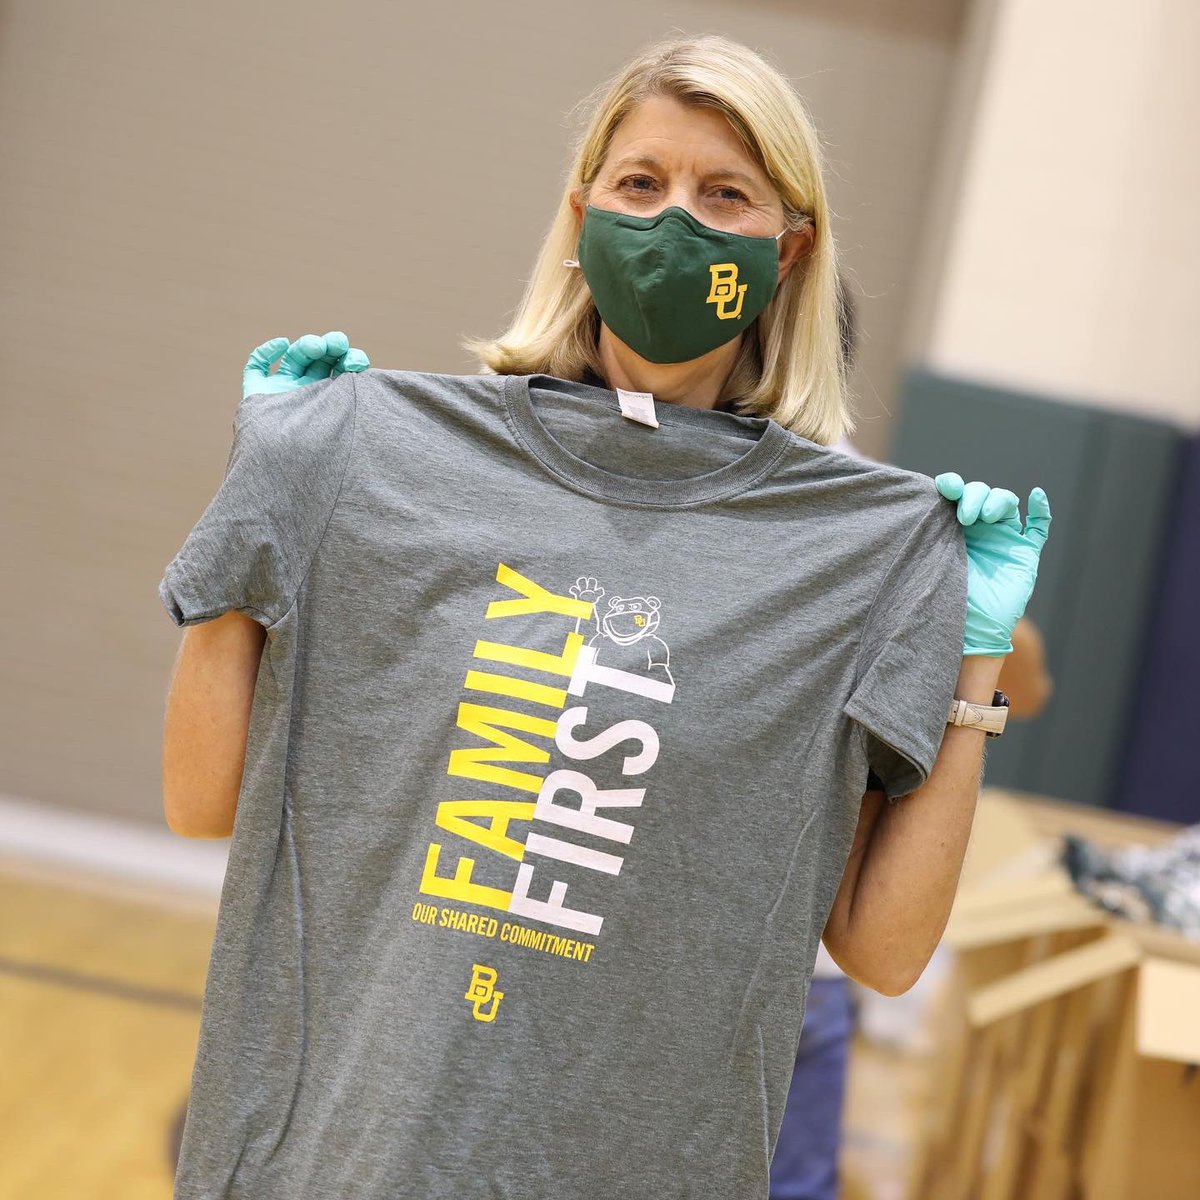 🚨 Volunteers on Thursday & Friday get a Family First t-shirt (*limited quantity, first come, first served), BU mask, plus a chance to win other free merch like an @OspreyPacks backpack or a @kleankanteen. 
#SicCOVID #BeAGoodNeighbear